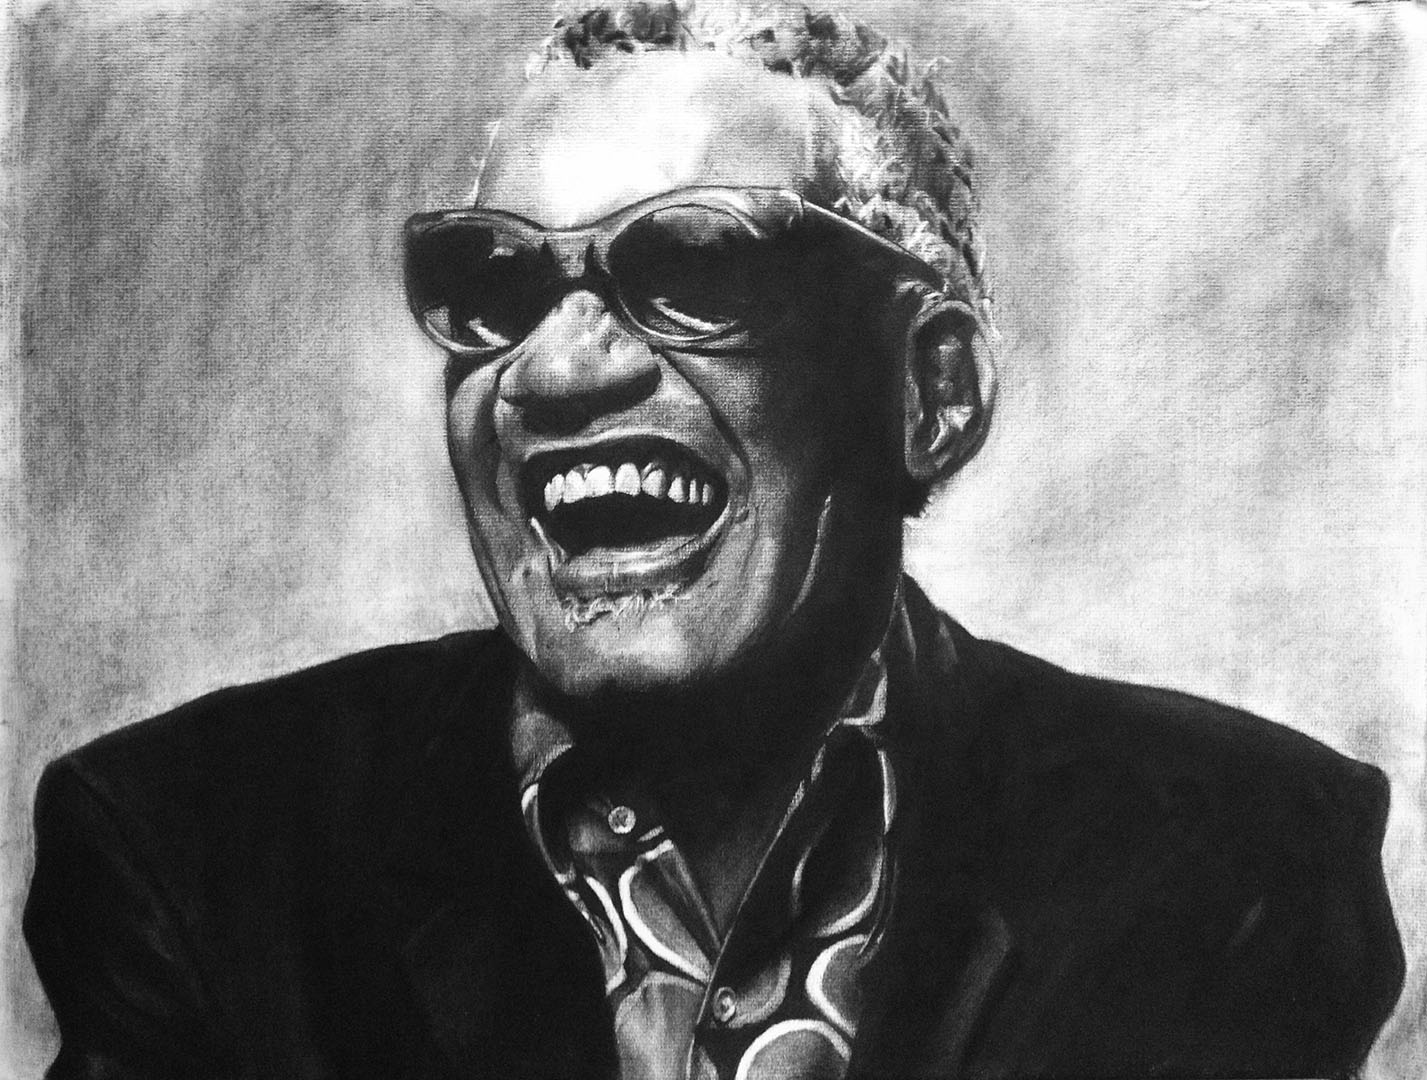 Portrait of Ray Charles from photo by Norman Seeff.